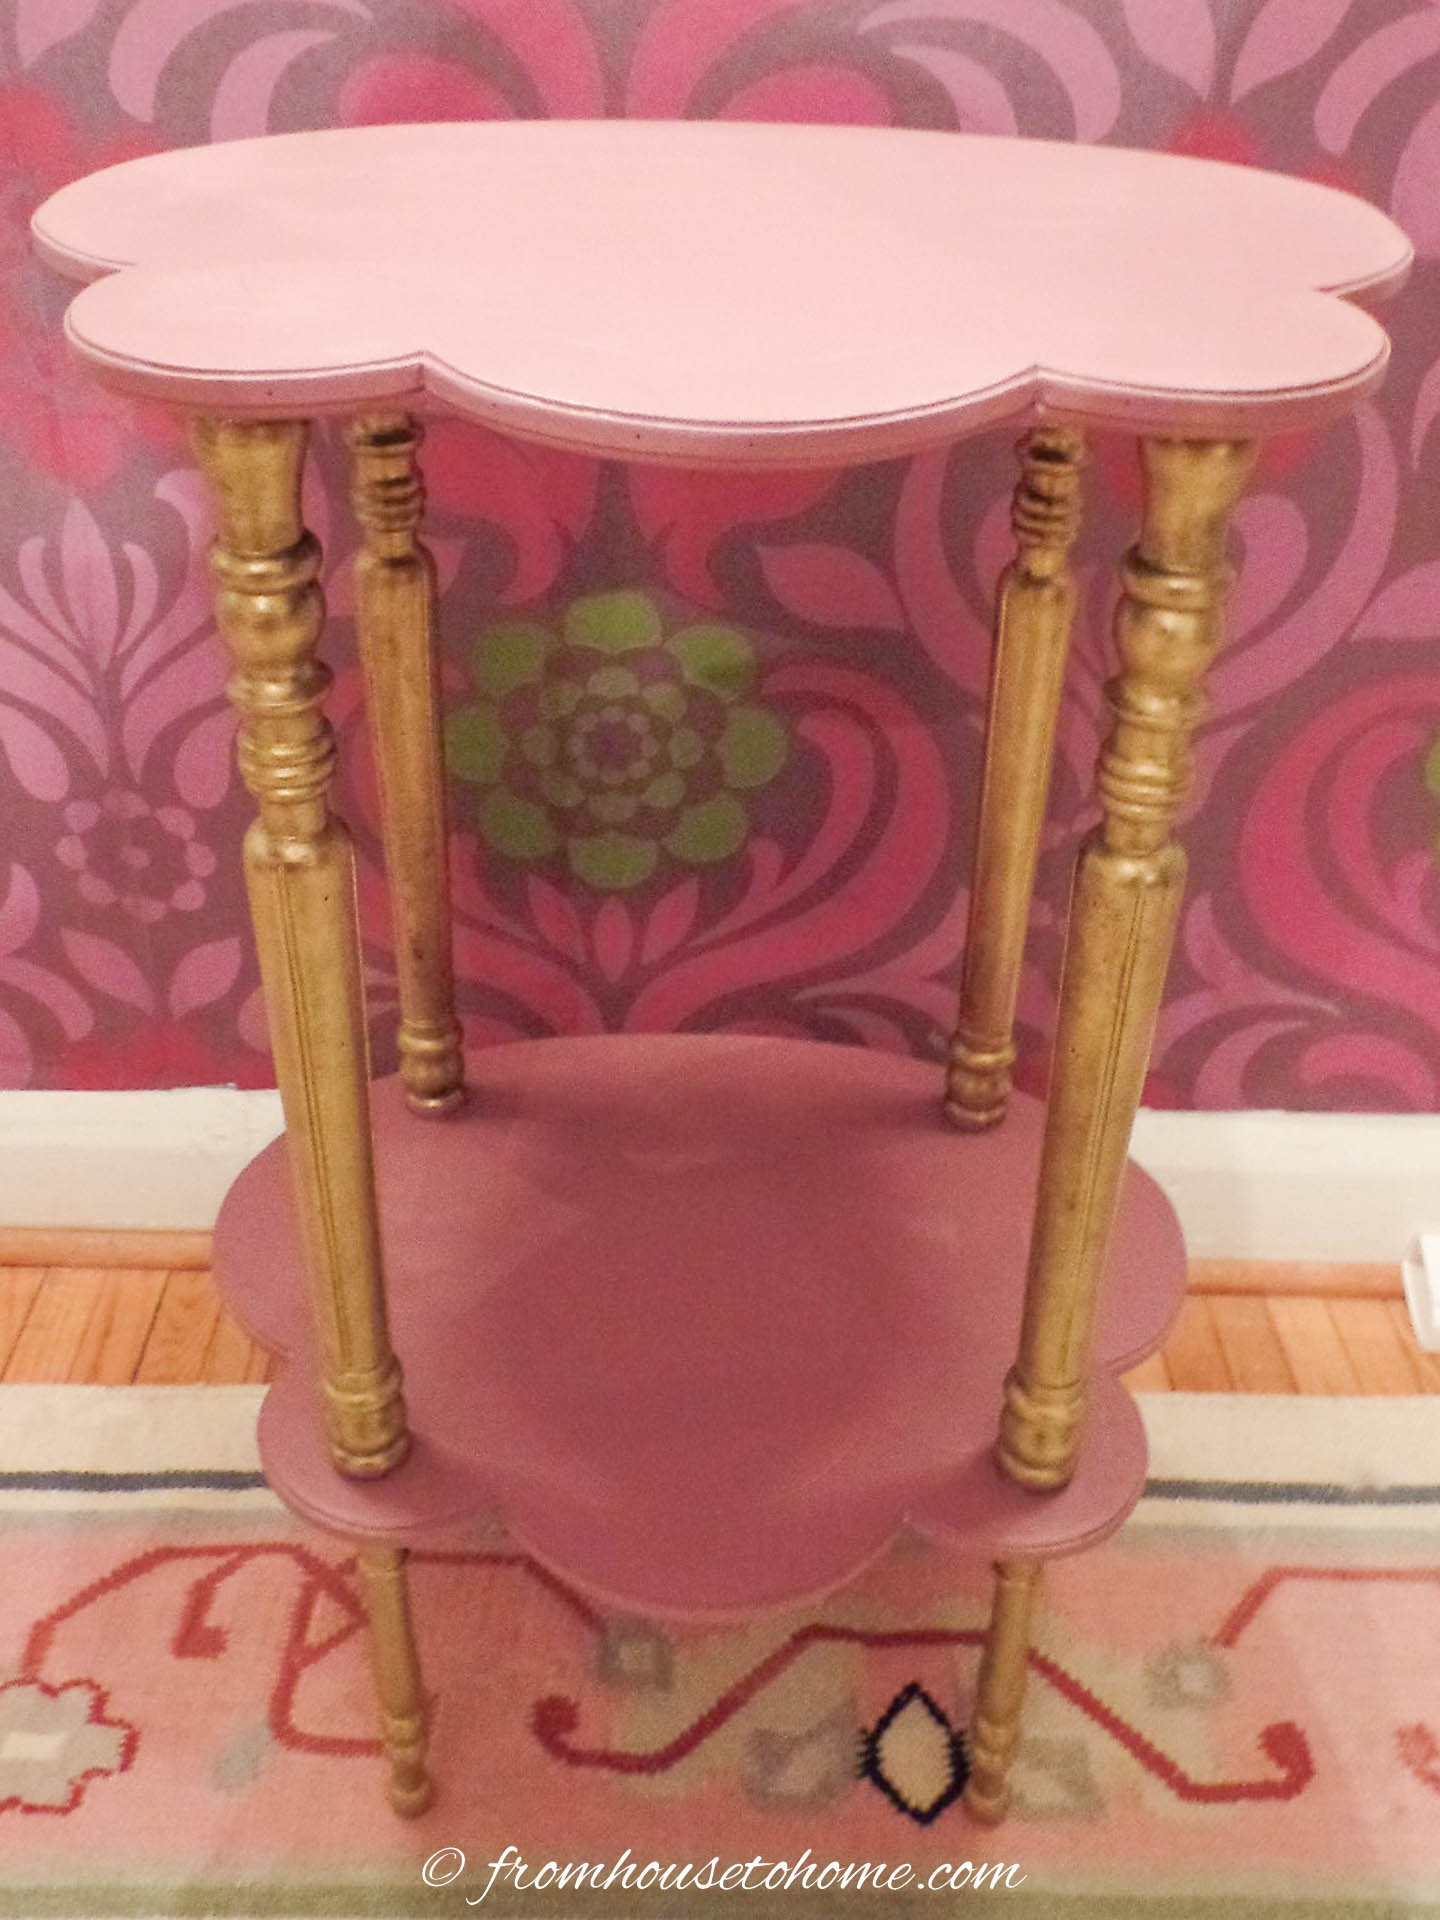 The tiered table with the top painted pink and the legs covered with gold wax